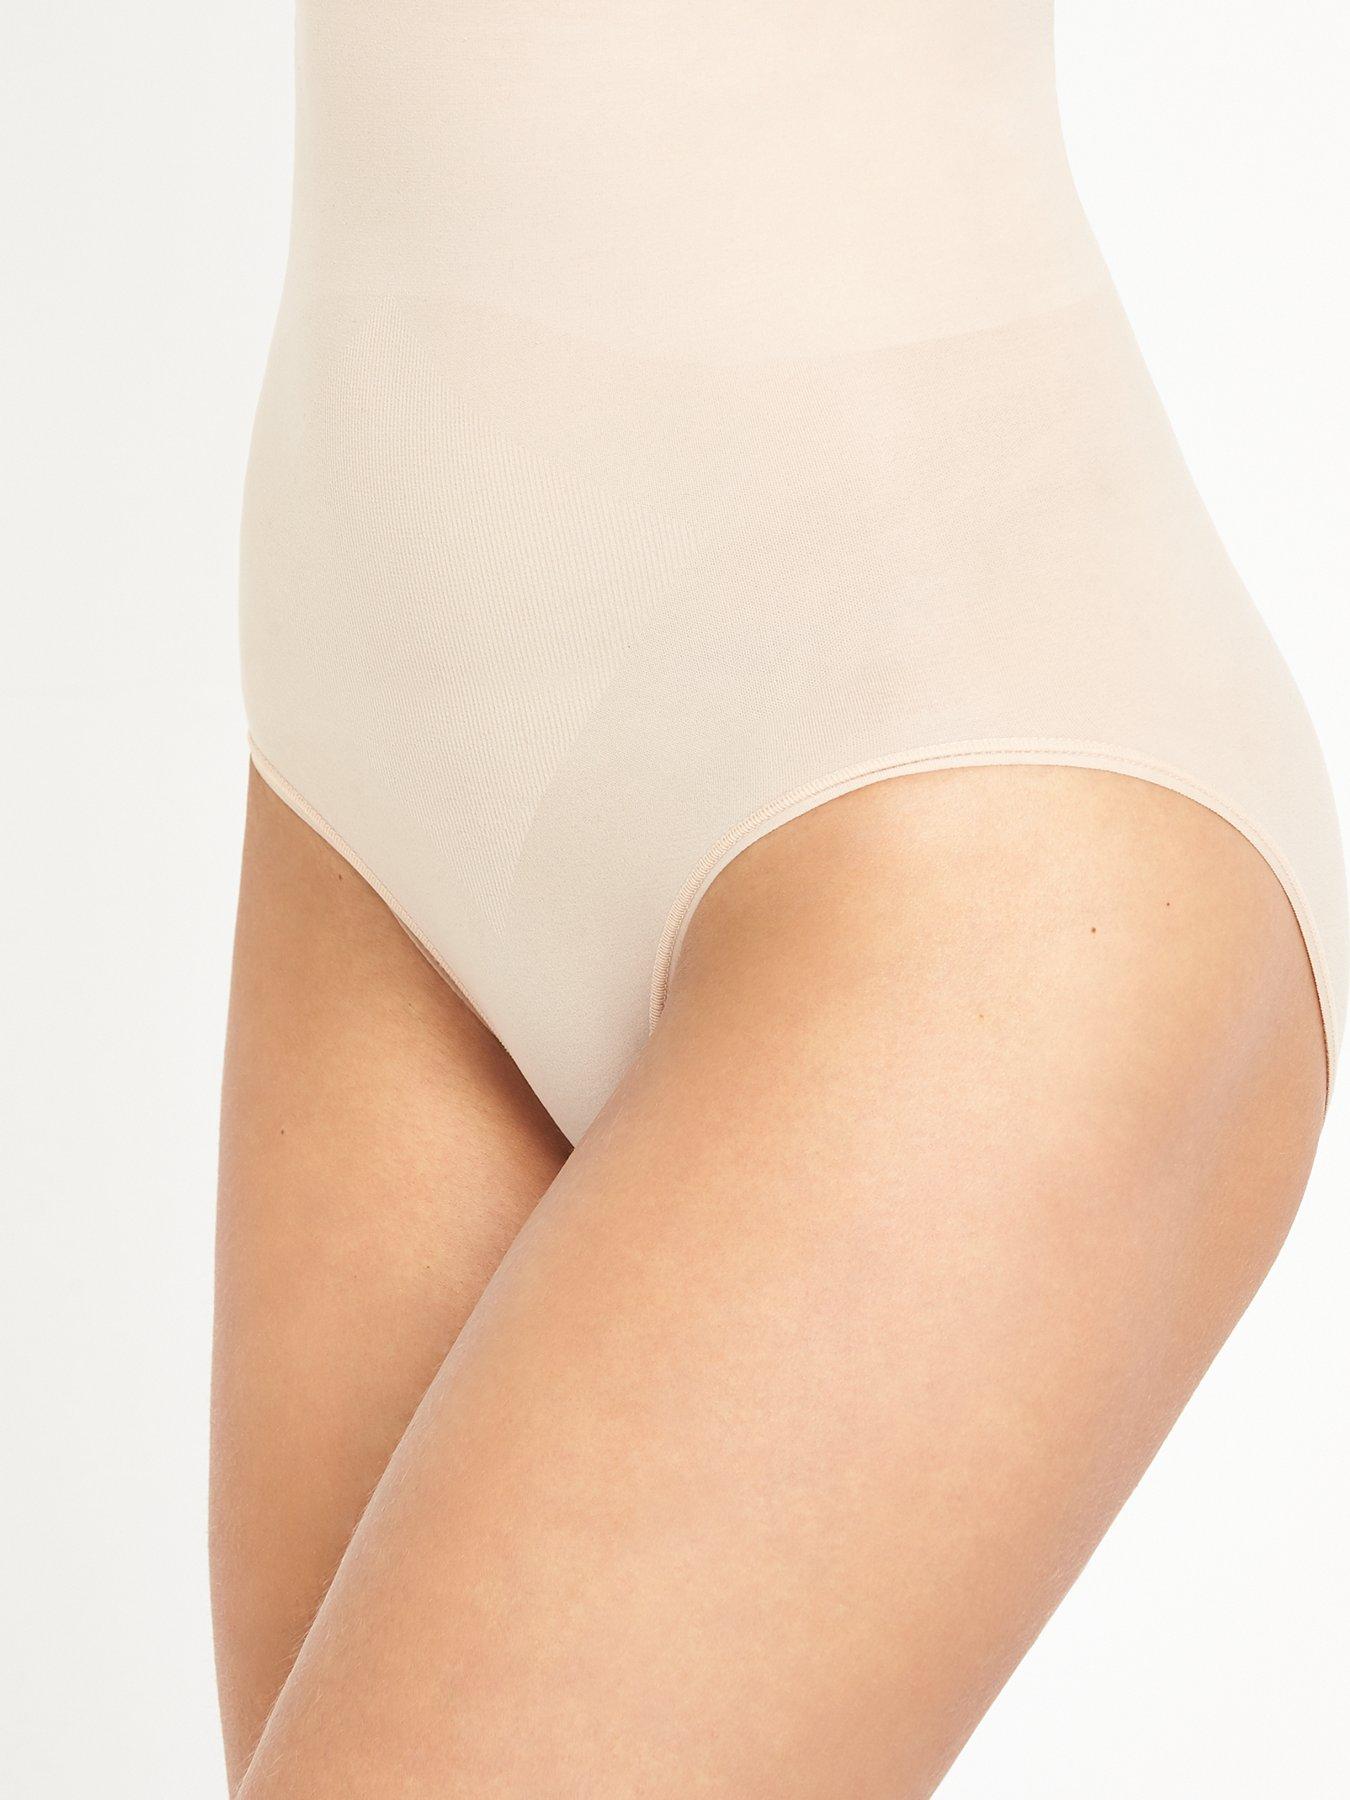 Spanx Spanx High Waisted Seemless Shaping Control Panty - Nude